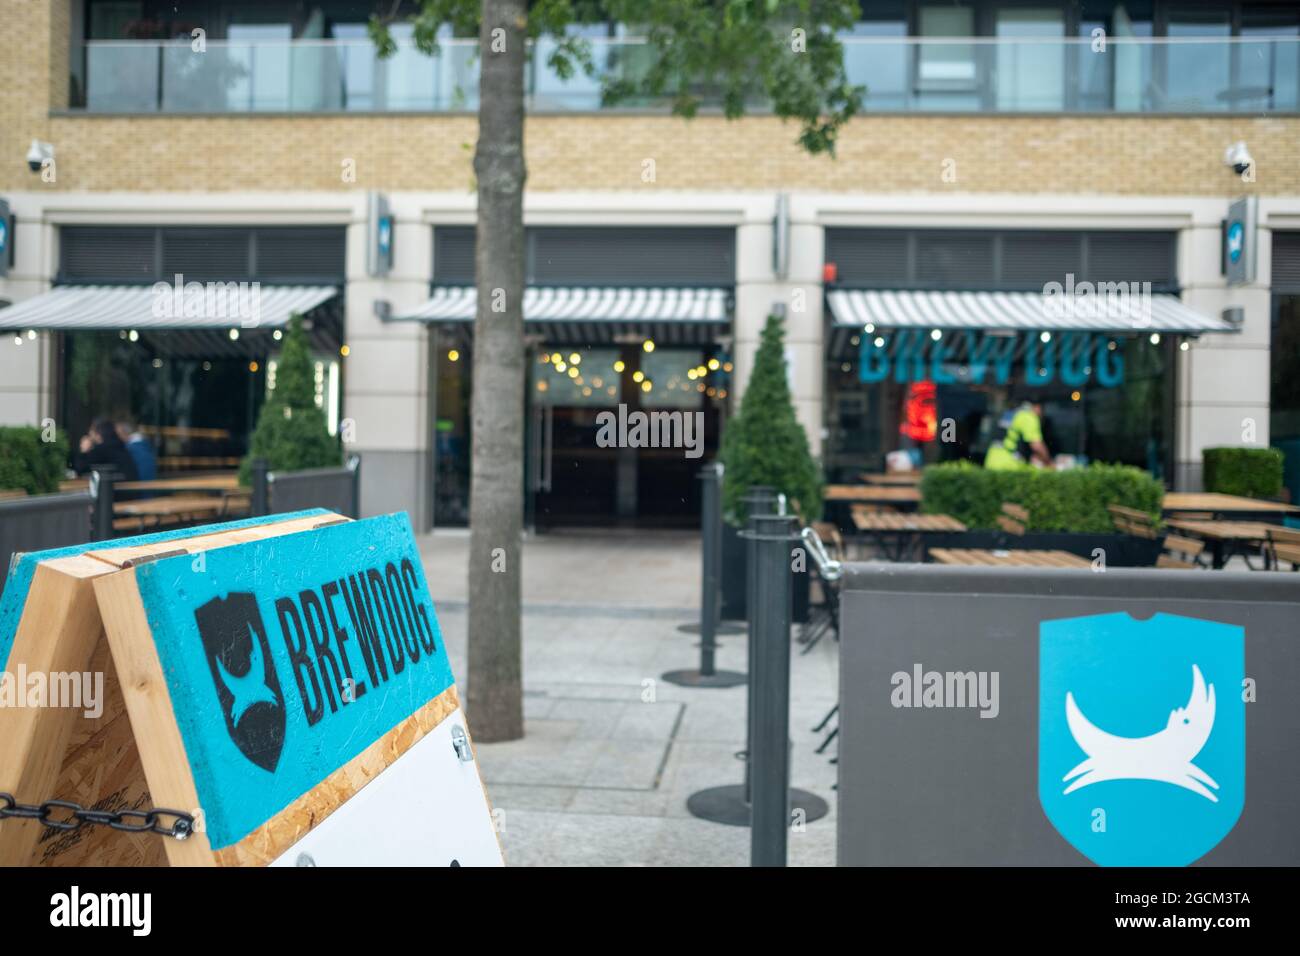 London- August 2021: Brewdog, a bar and brewery brand famous for crafts beers in Dickens Yard, Ealing west London. Stock Photo